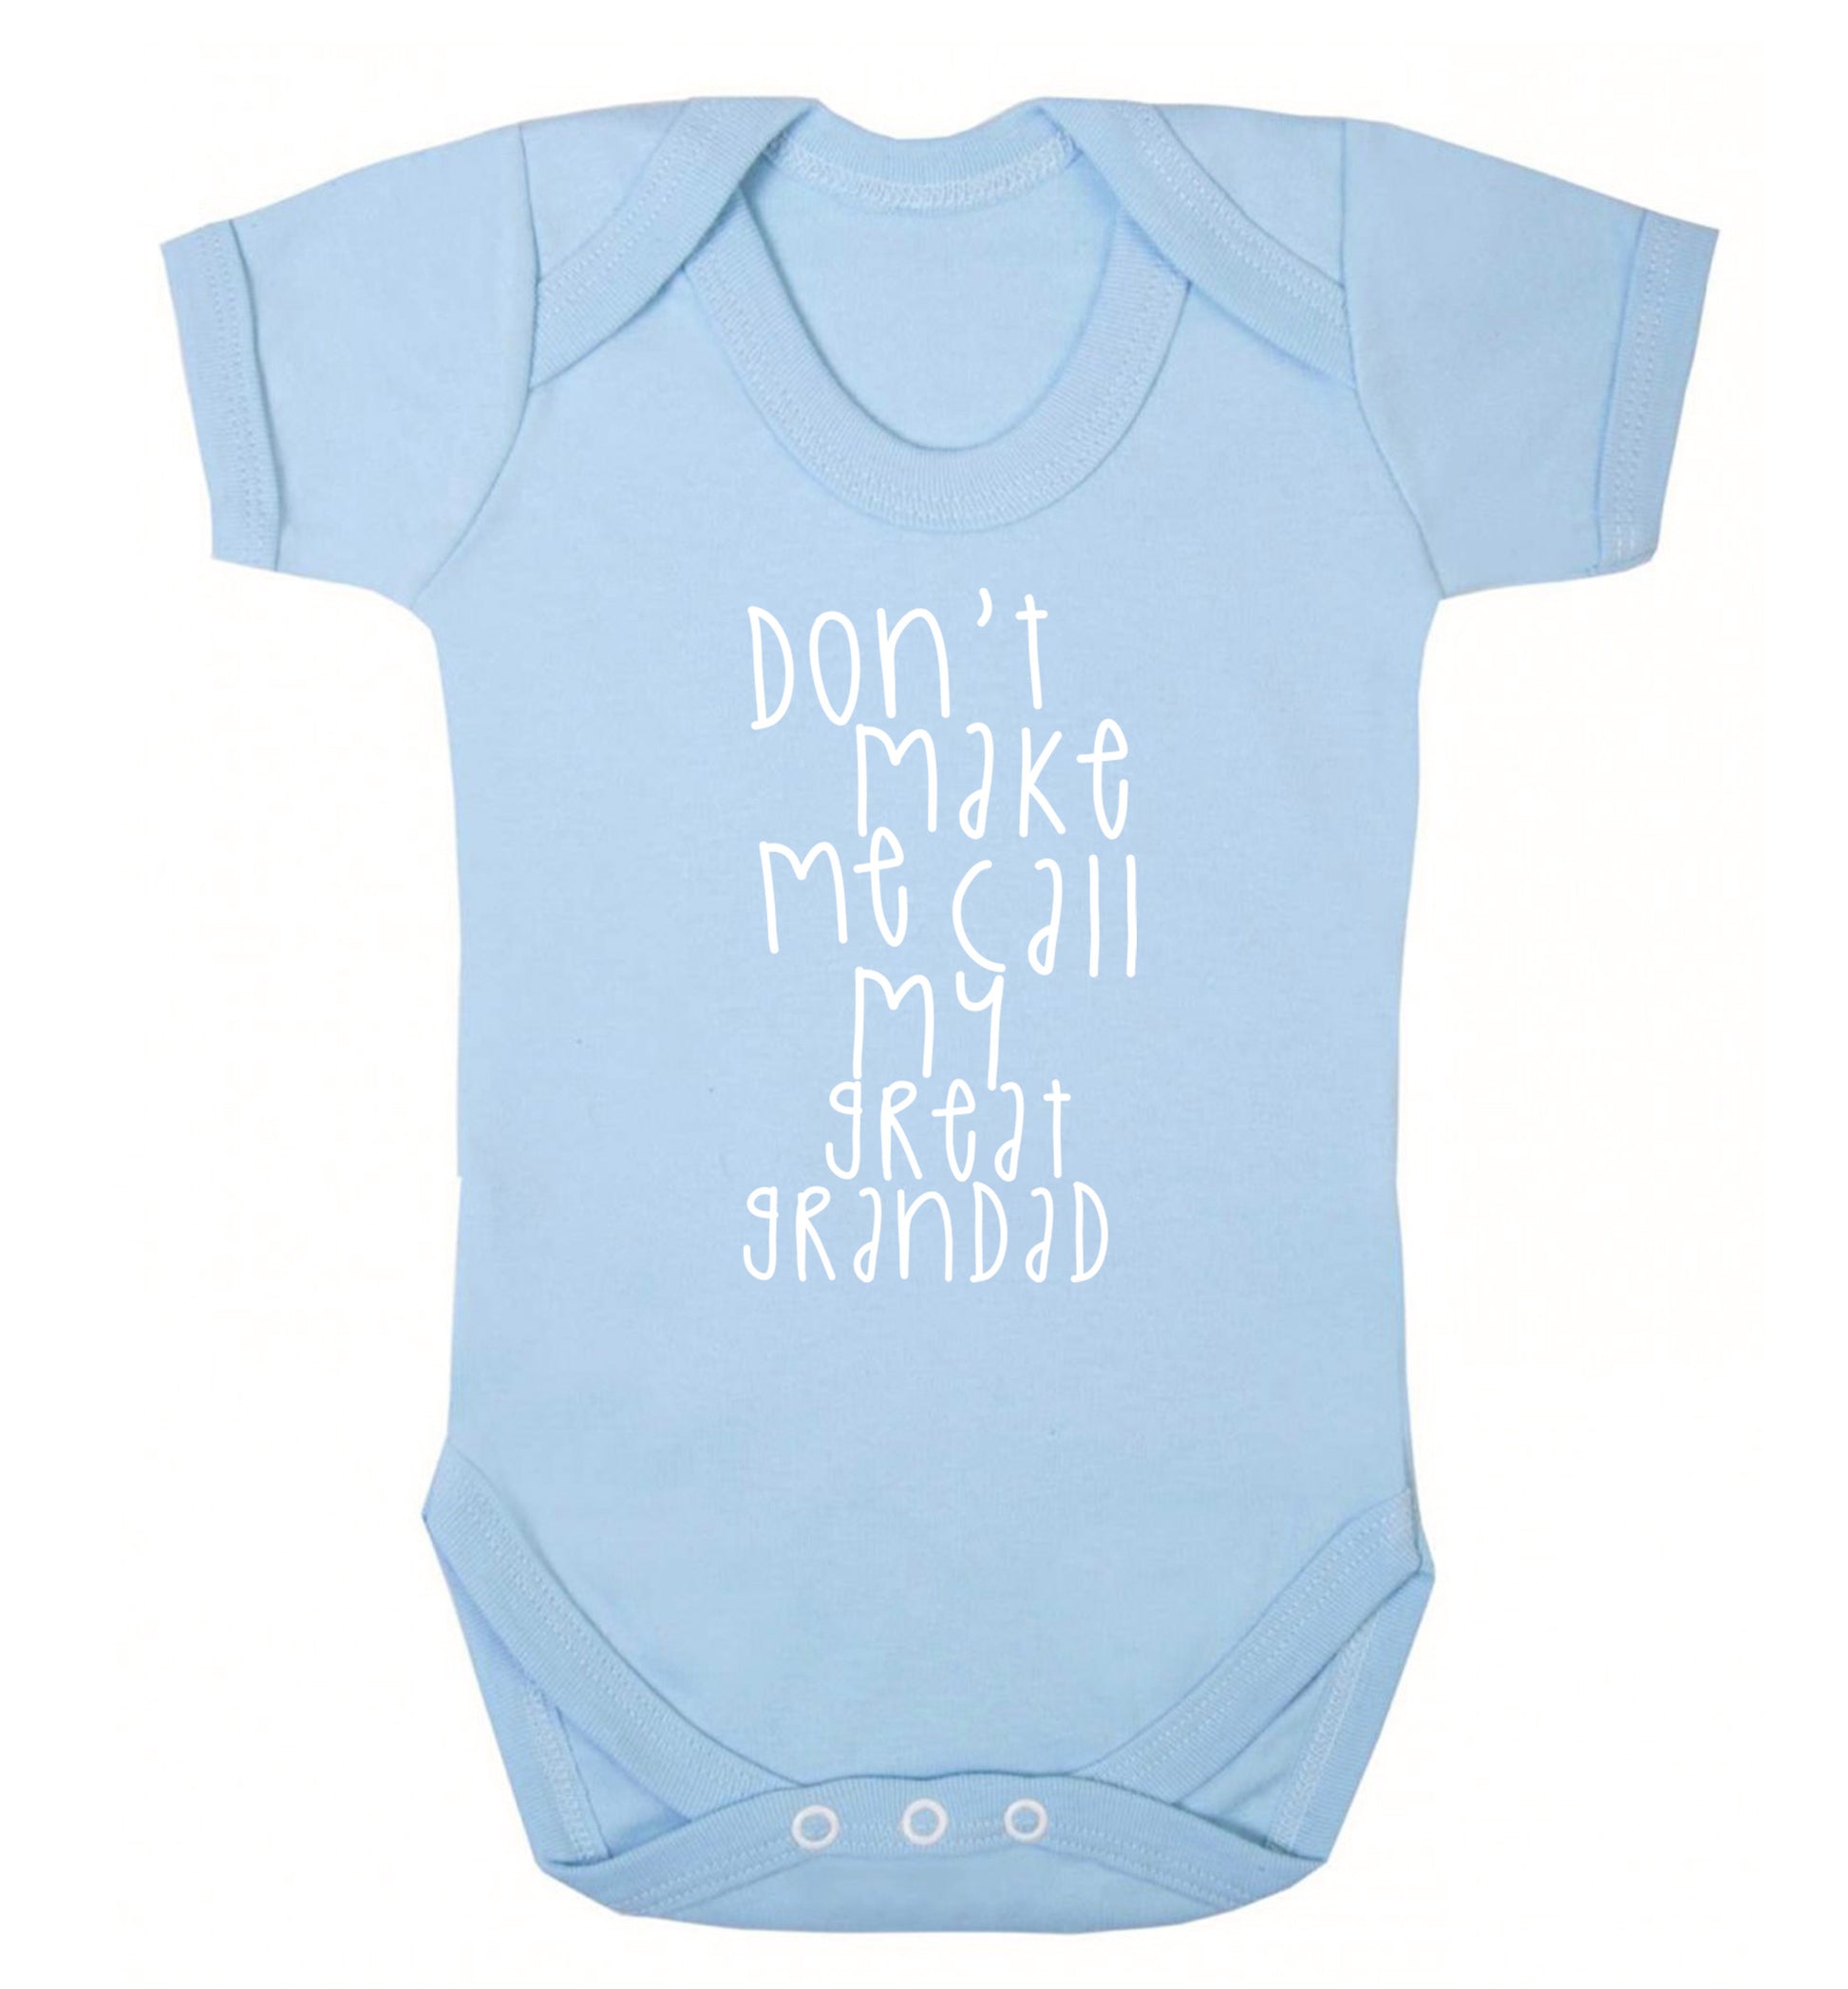 Don't make me call my great grandad Baby Vest pale blue 18-24 months